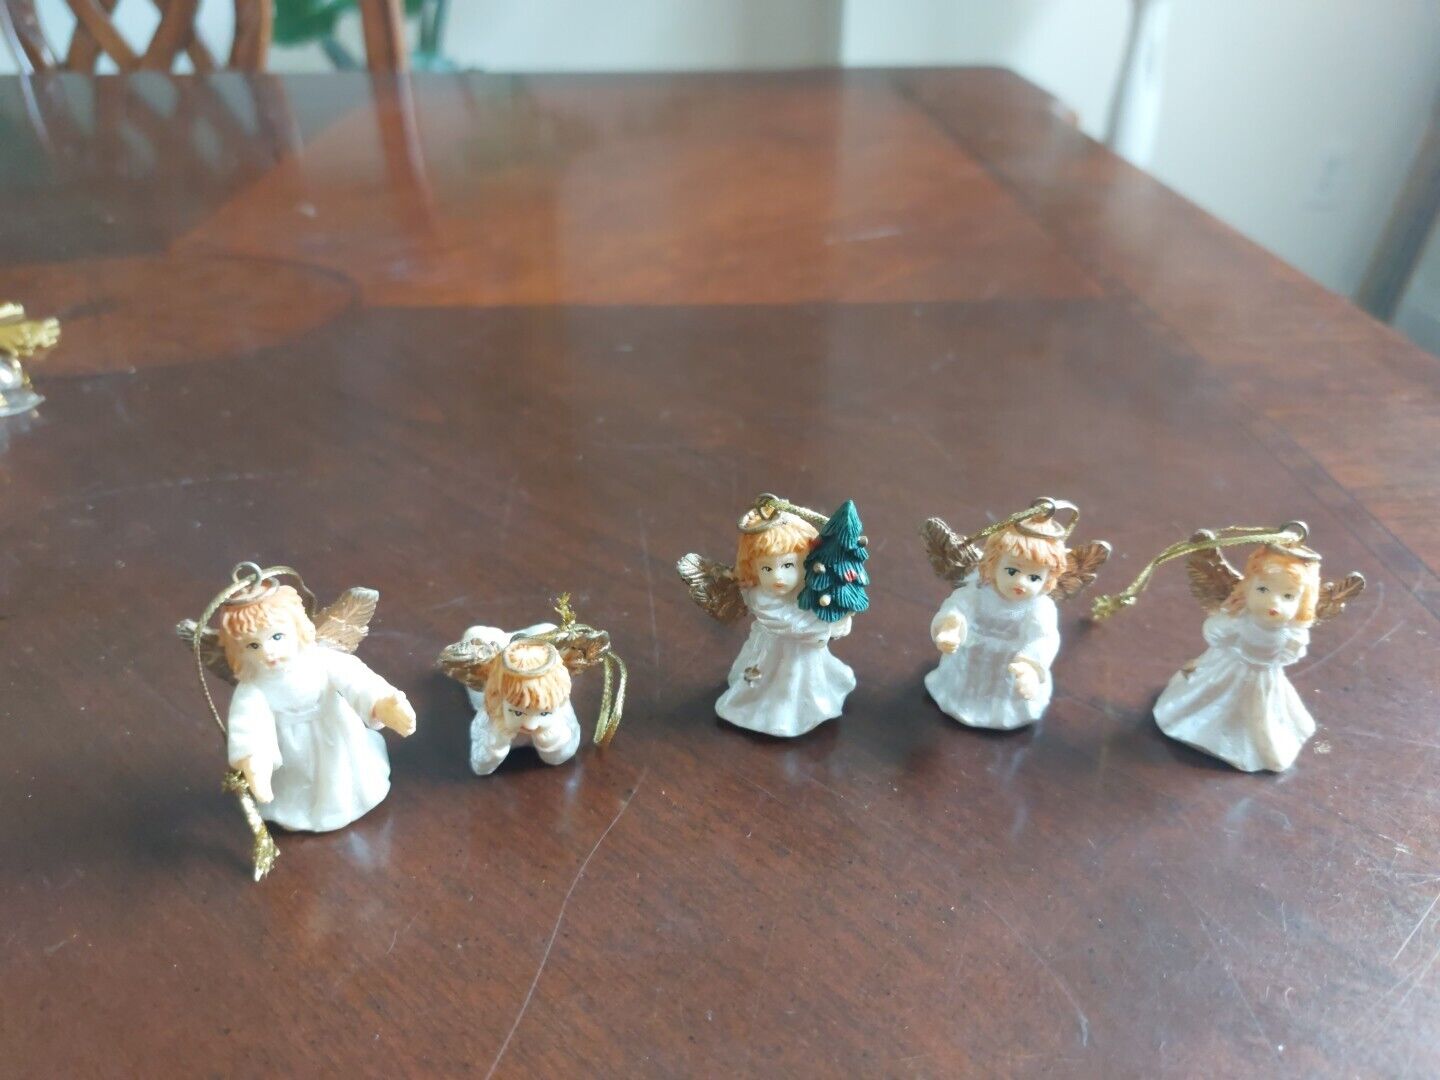  Giftco Vintage Set of  5  Angels Mini Ornaments Christmas Tree Decoration